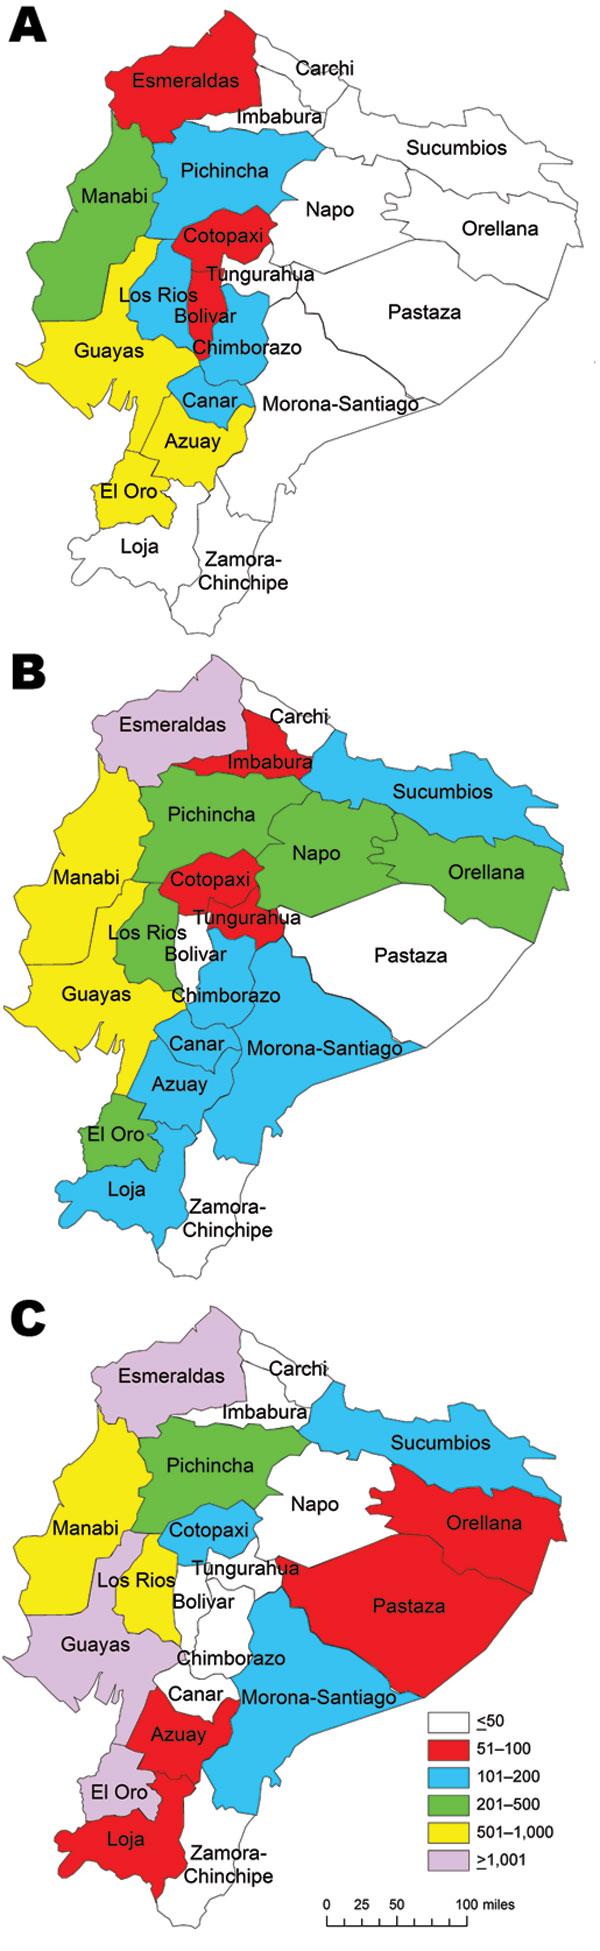 Number of hospital admissions for malaria in each province of Ecuador in peak malaria years of A) 1969, B) 1990, and C) 2000. Data were obtained from the Instituto de Nacional Estatisticas y Censos (38).